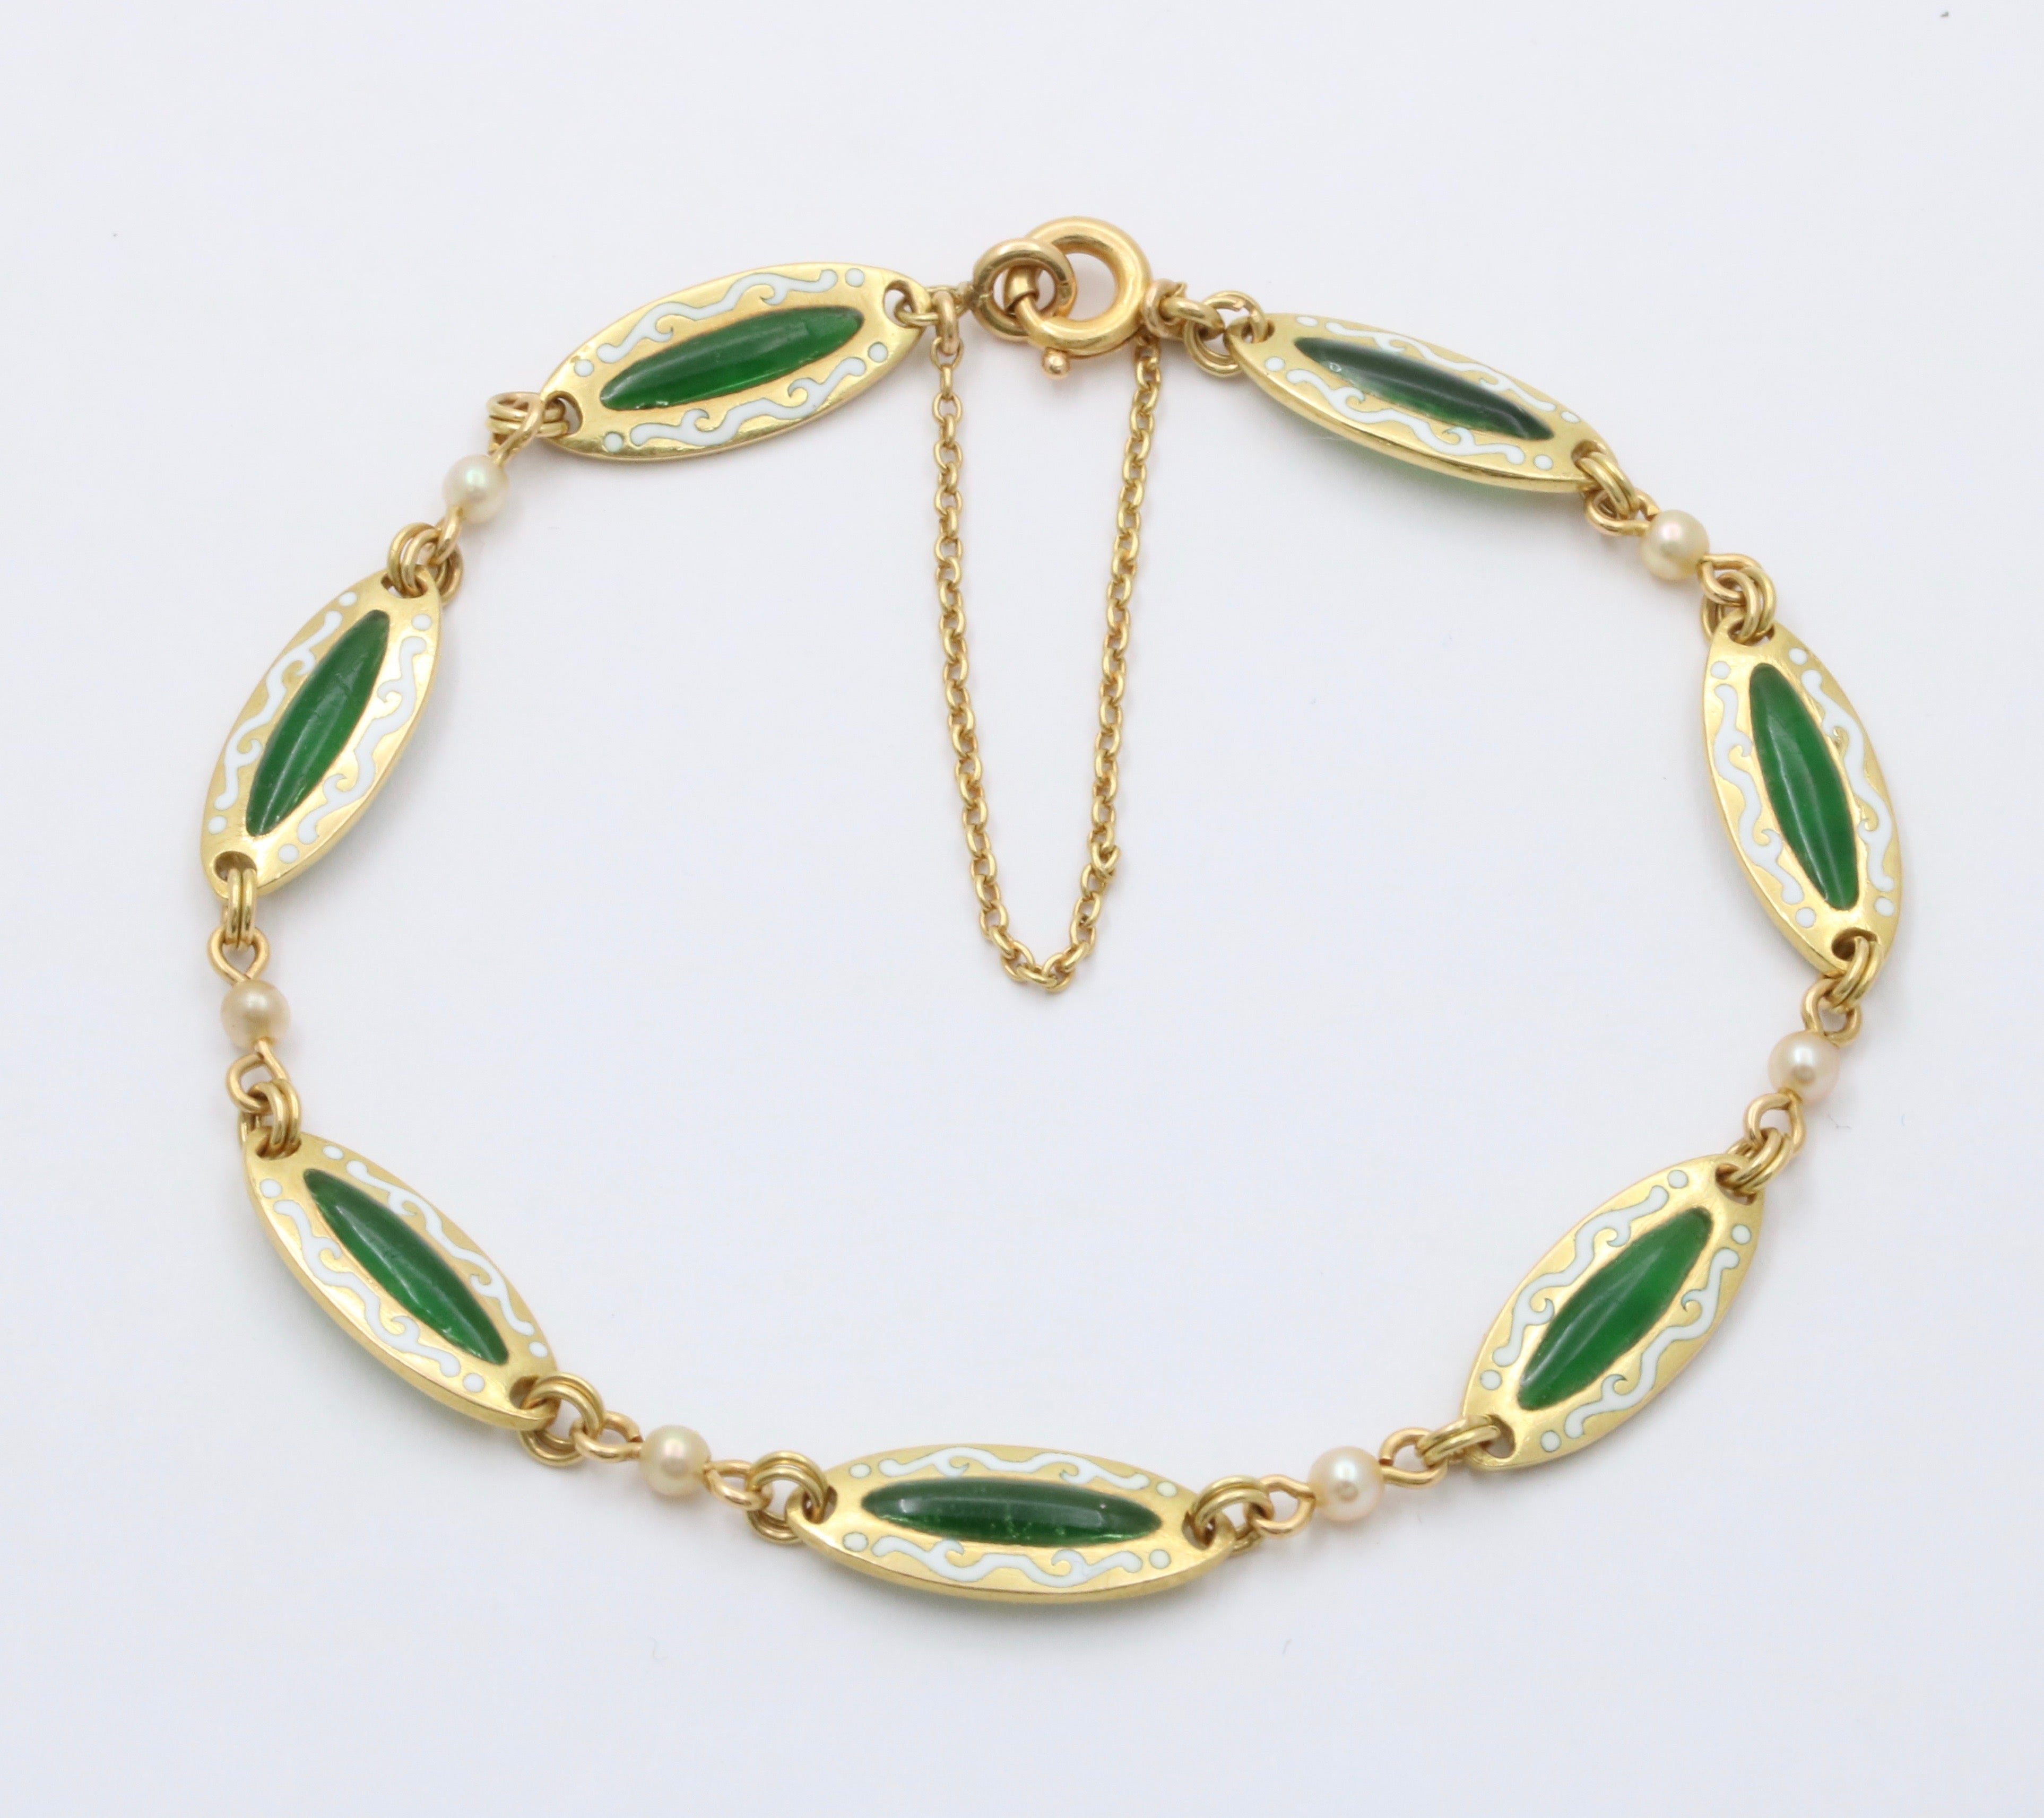 Dainty Victorian Gold & Enamel Bangle Bracelet | Exquisite Jewelry for  Every Occasion | FWCJ